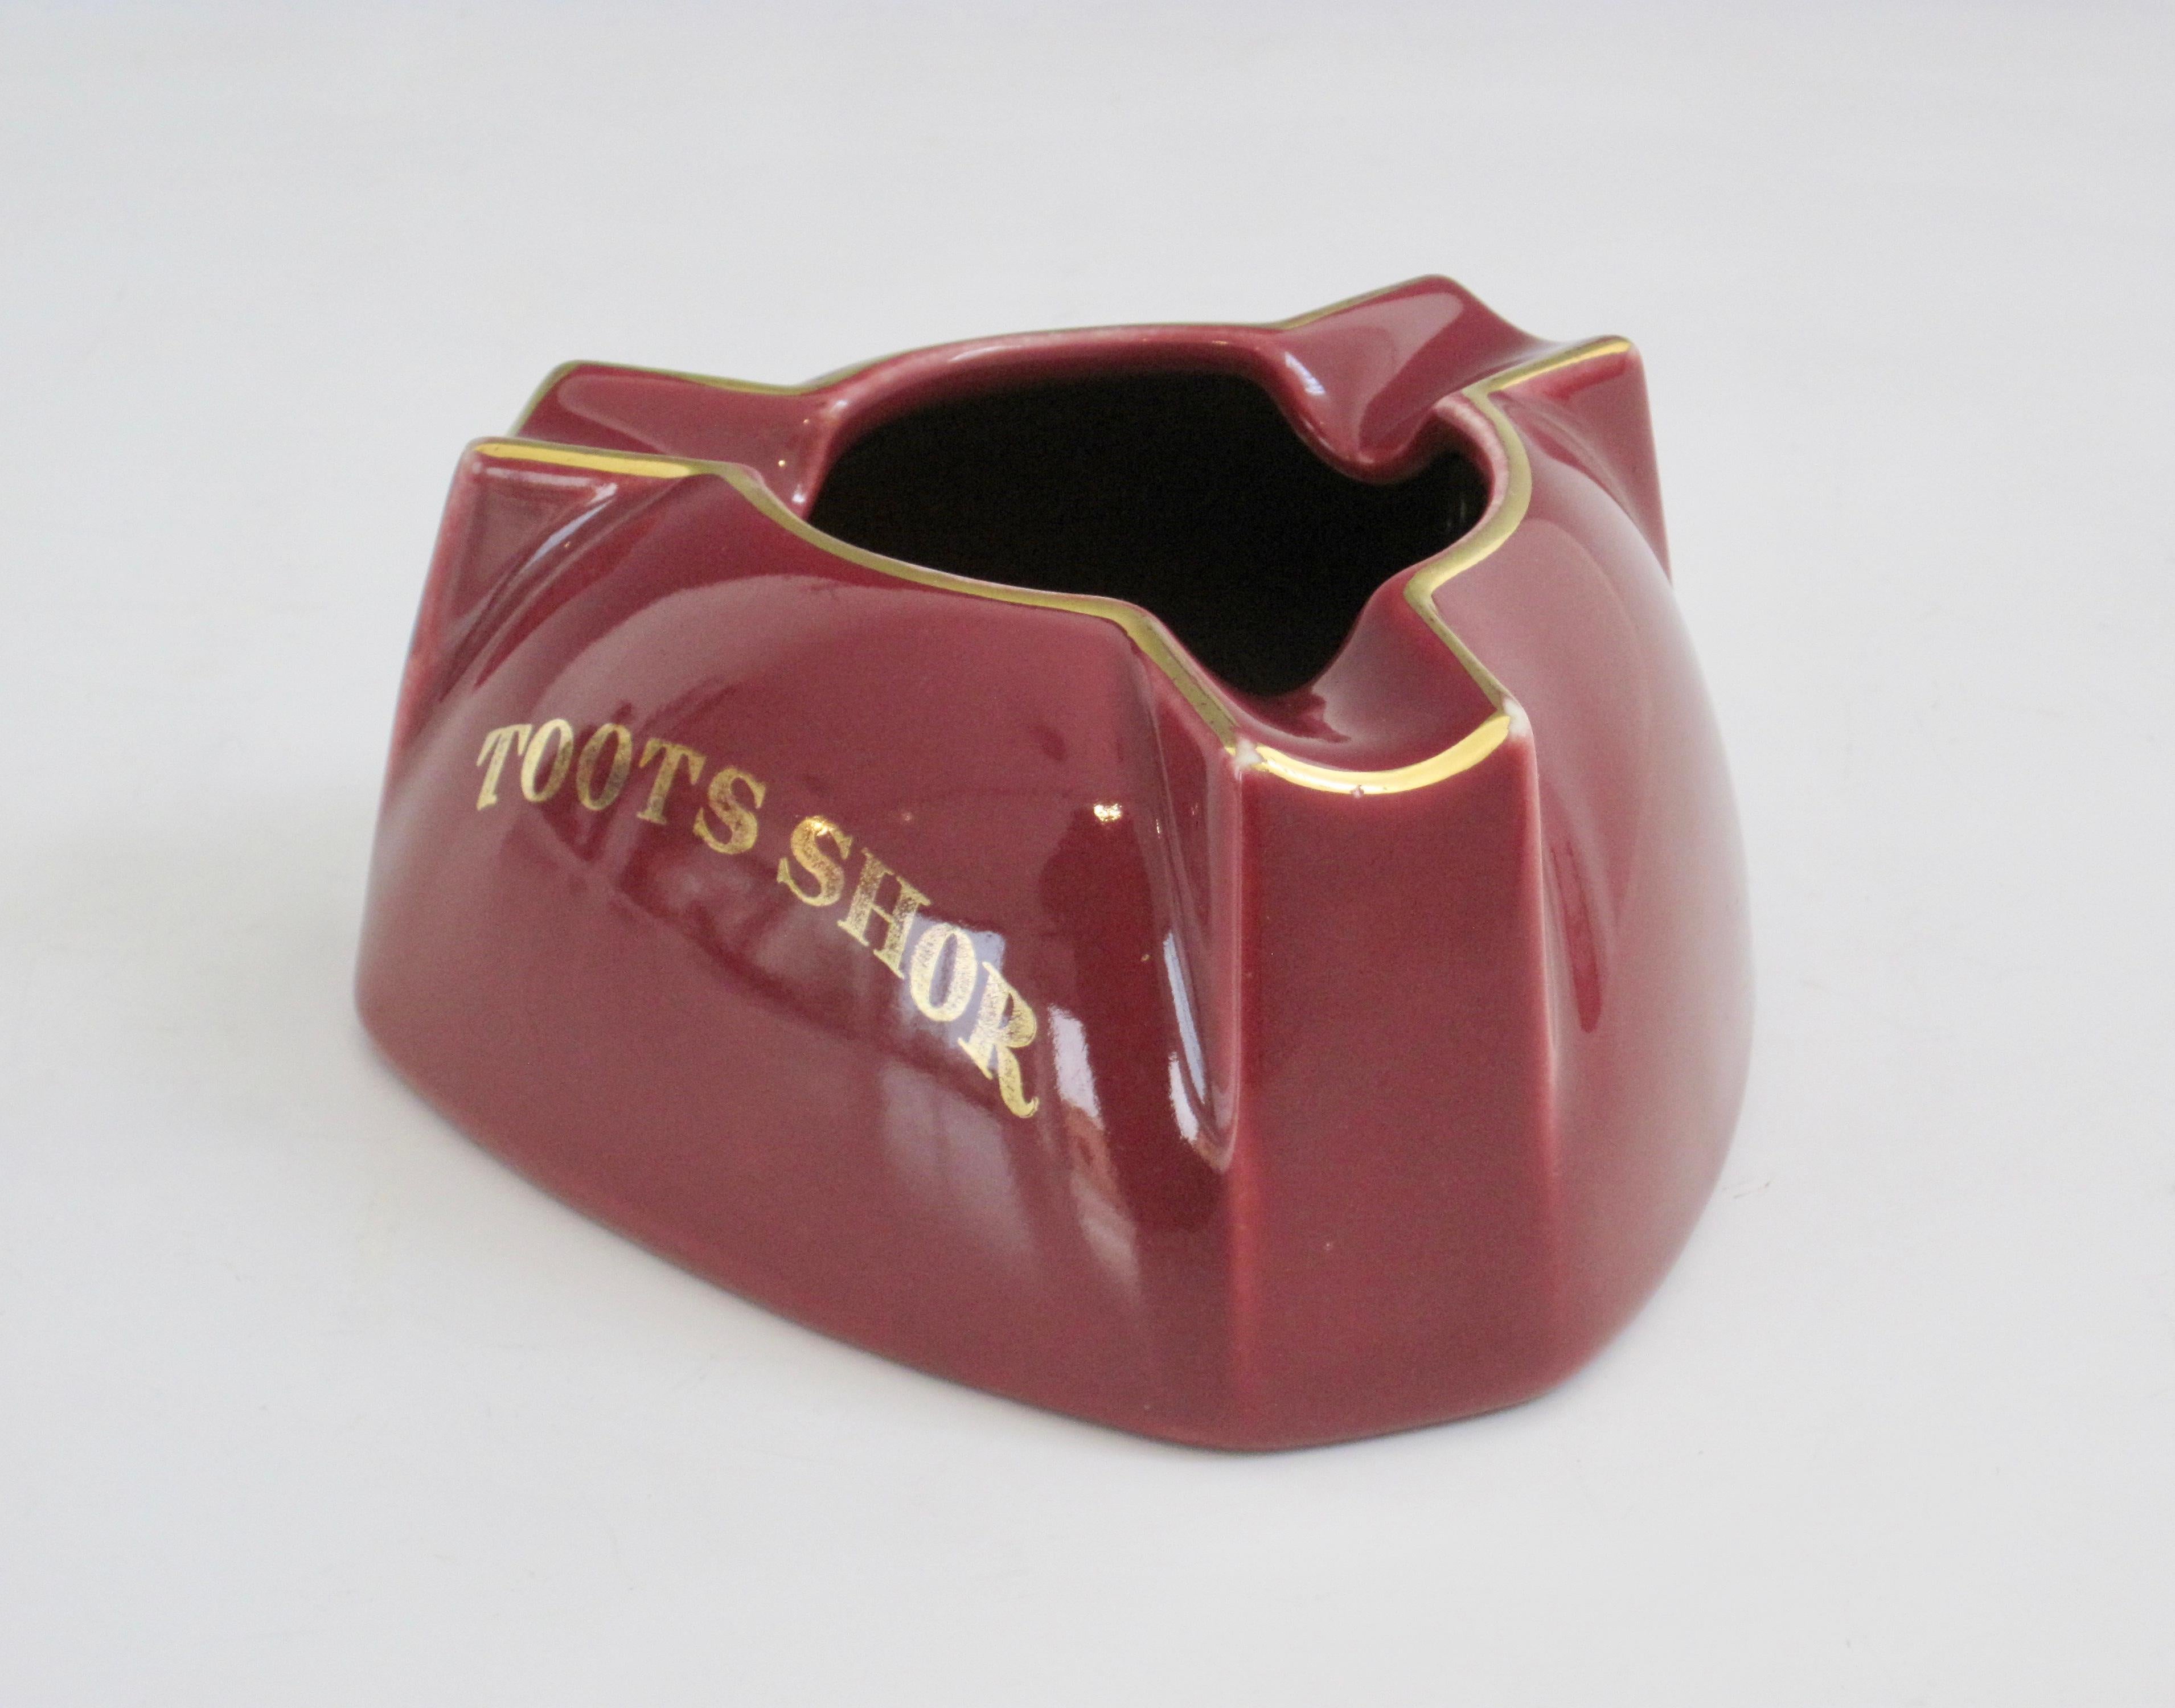 Mid-Century Modern 1950s Toots Shor Restaurant Ashtray For Sale